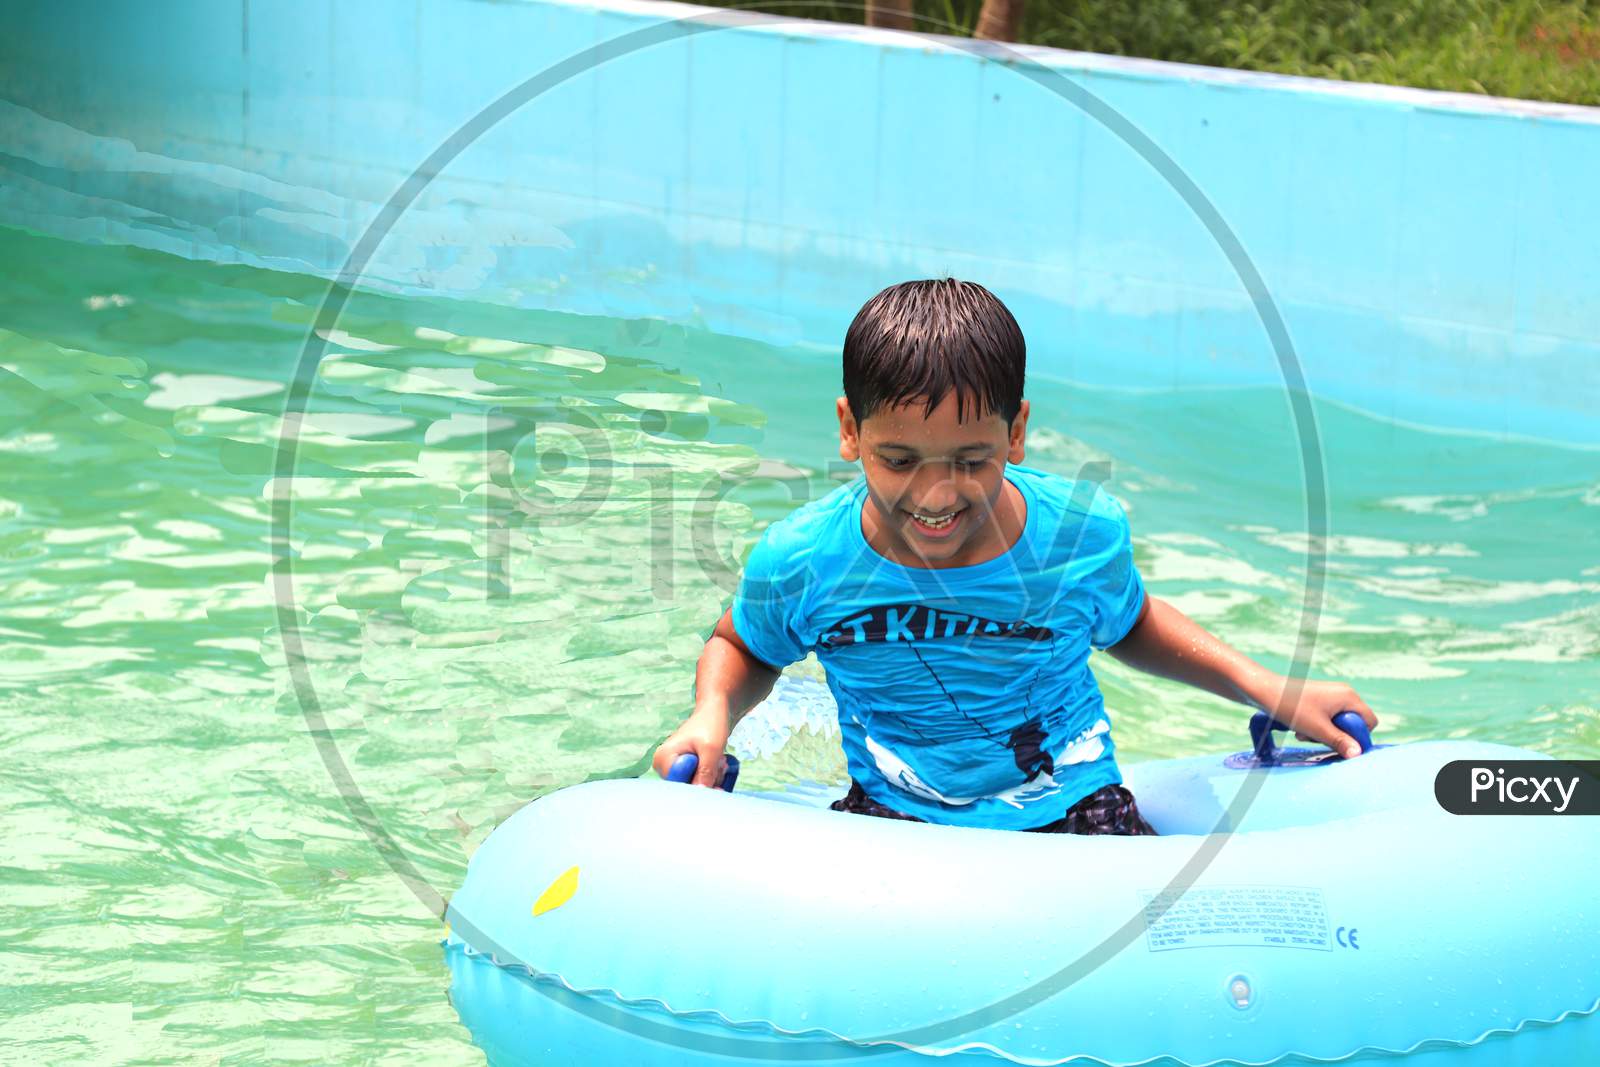 A school boy is enojying at the swimming pool water, very enjoyable moment